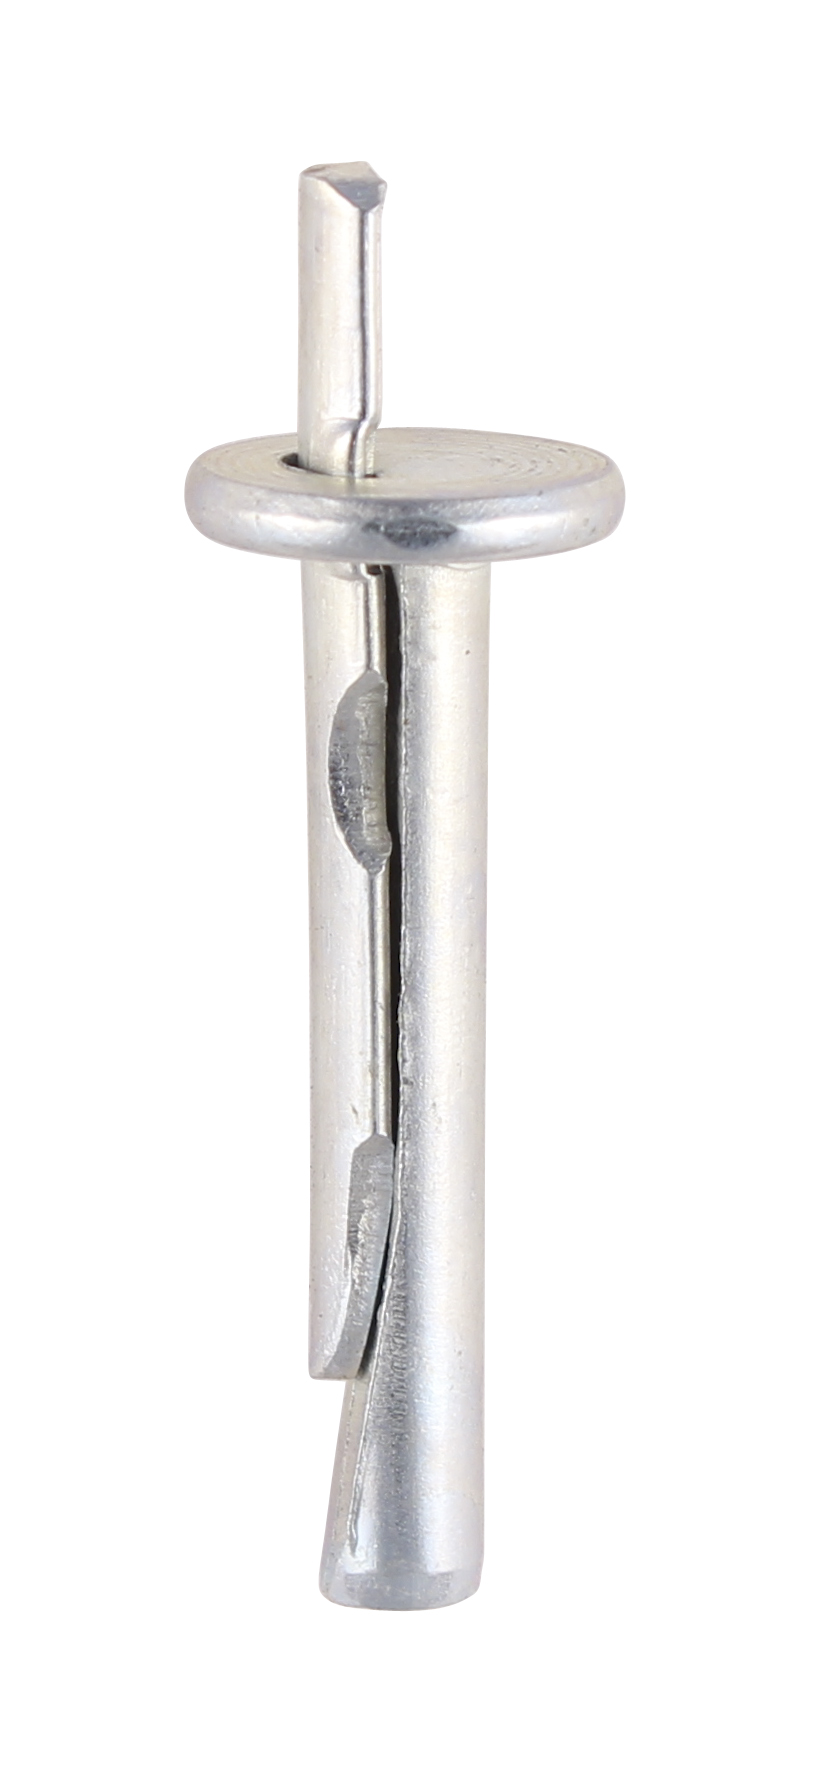 M6 x 40 Metal Nail-In CEILING Anchors